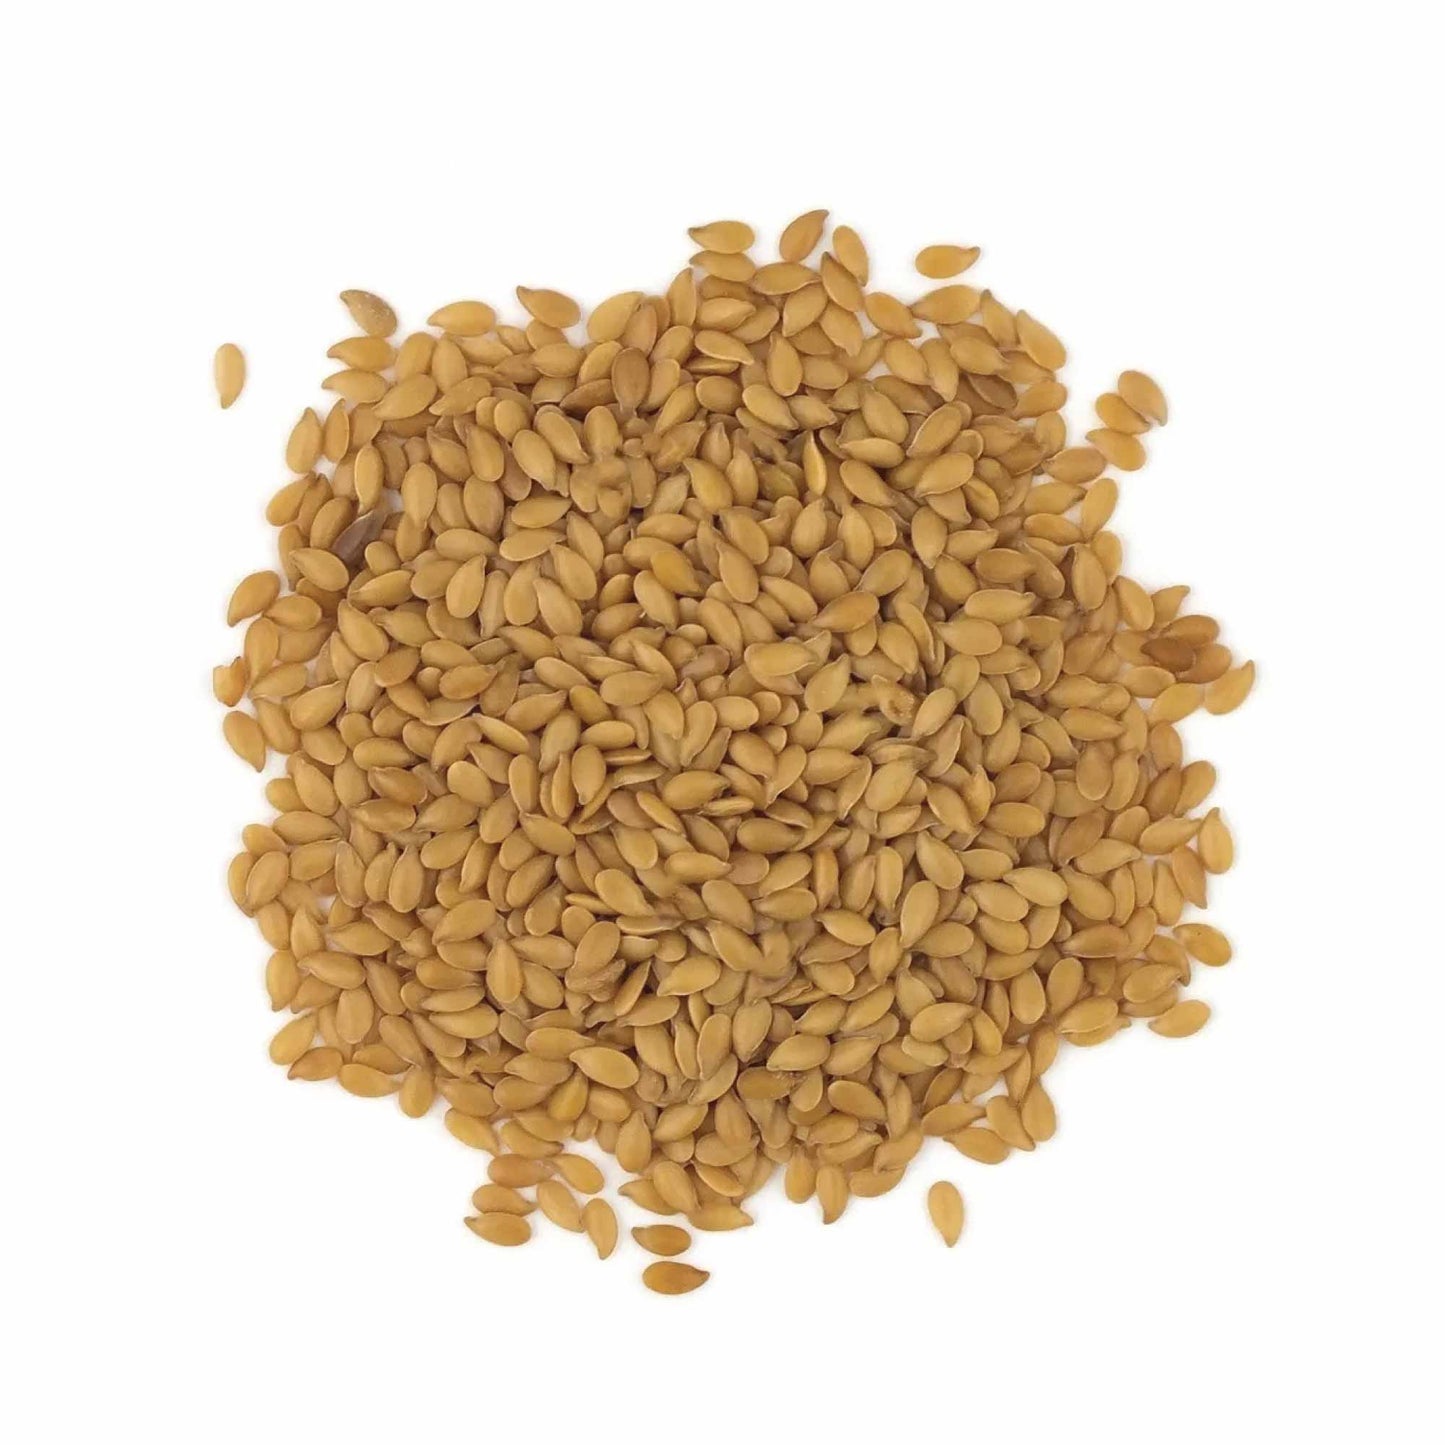 2Kg Organic Golden Linseed Flaxseed Whole Grain Flax Seed No GMO Omega3 6 Fibre